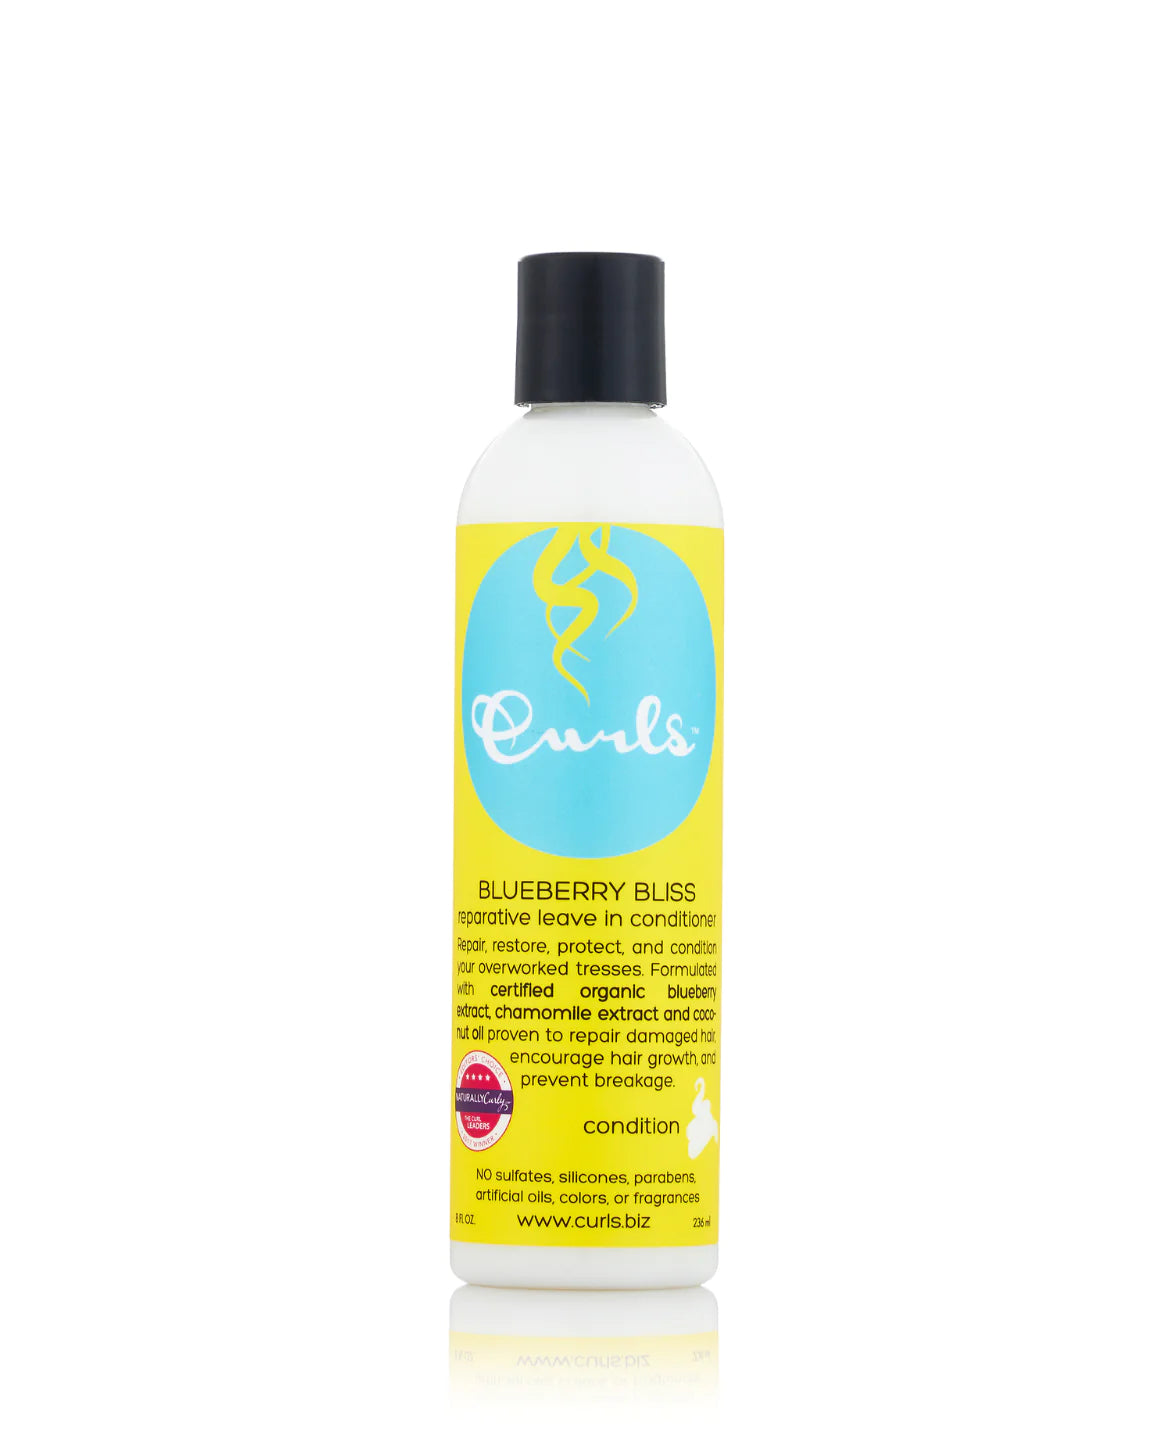 Curls™ Blueberry Bliss Reparative Leave-in Conditioner